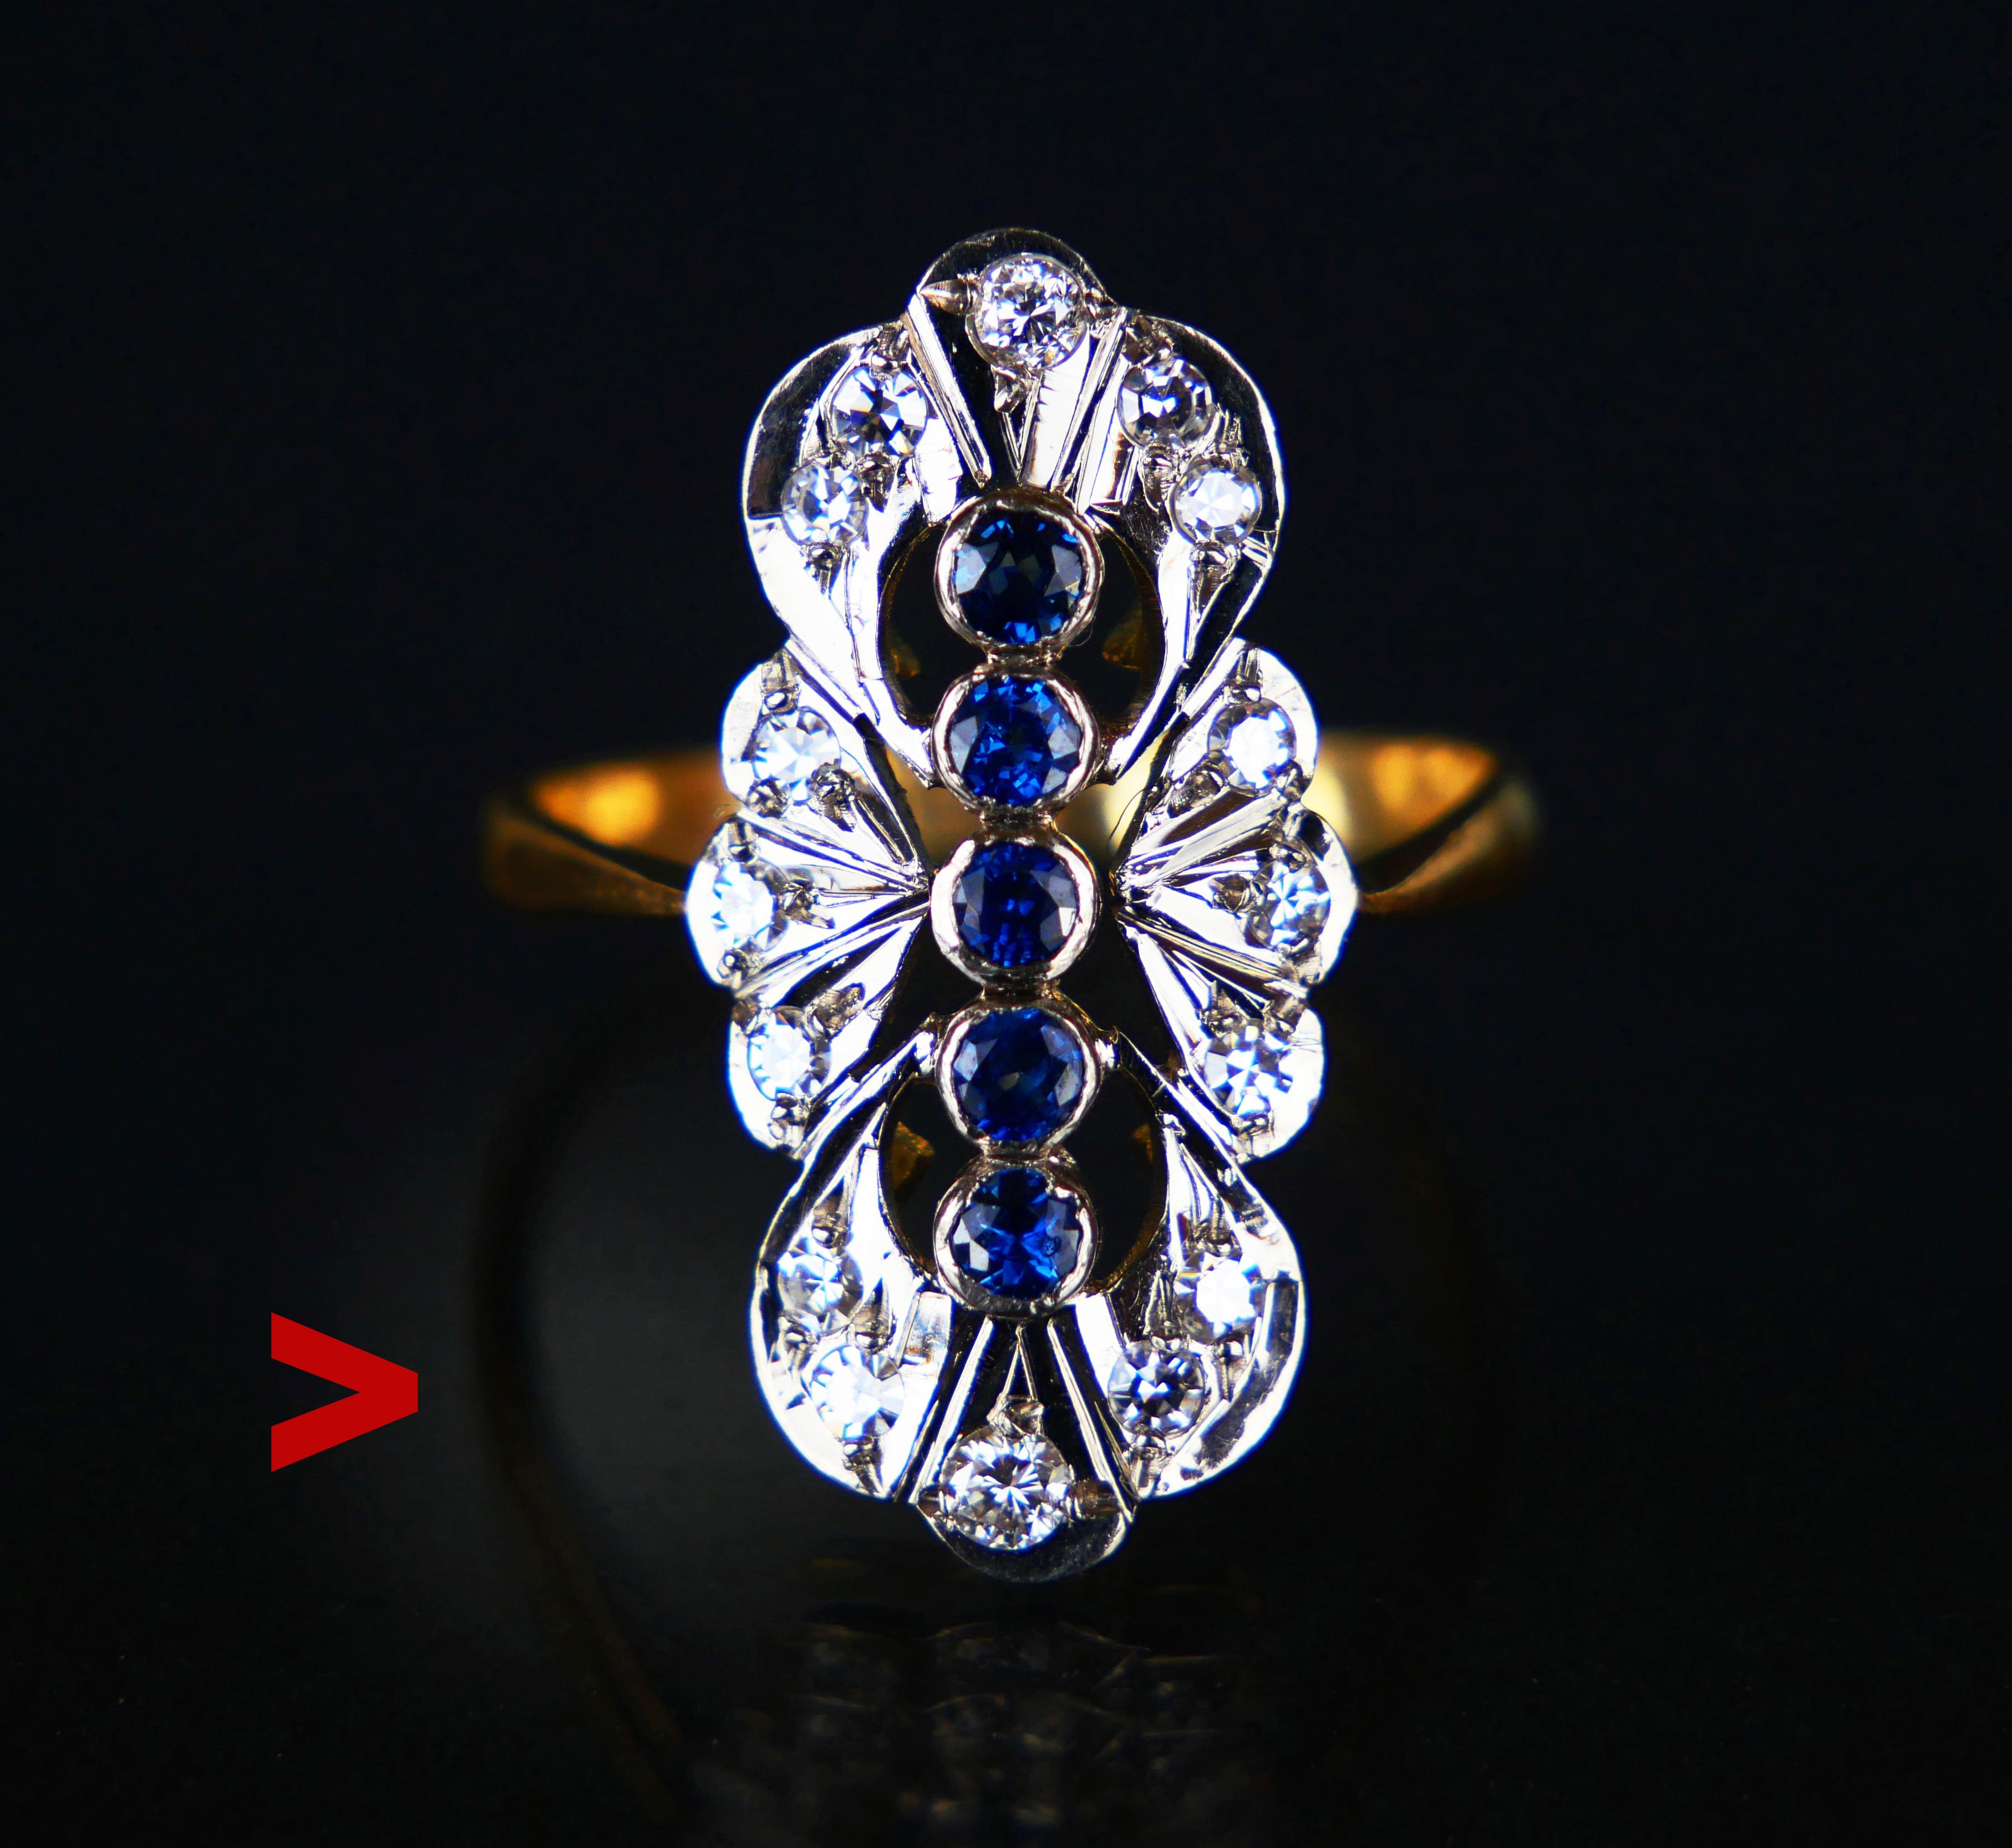 This ring has a beautiful arrangement of natural Sapphires and Diamonds set on an openwork navette or boat-shaped crown with Platinum clusters melted into a solid 18K Yellow Gold base.

Swedish import hallmarks, hallmarked 18K. This ring dates to